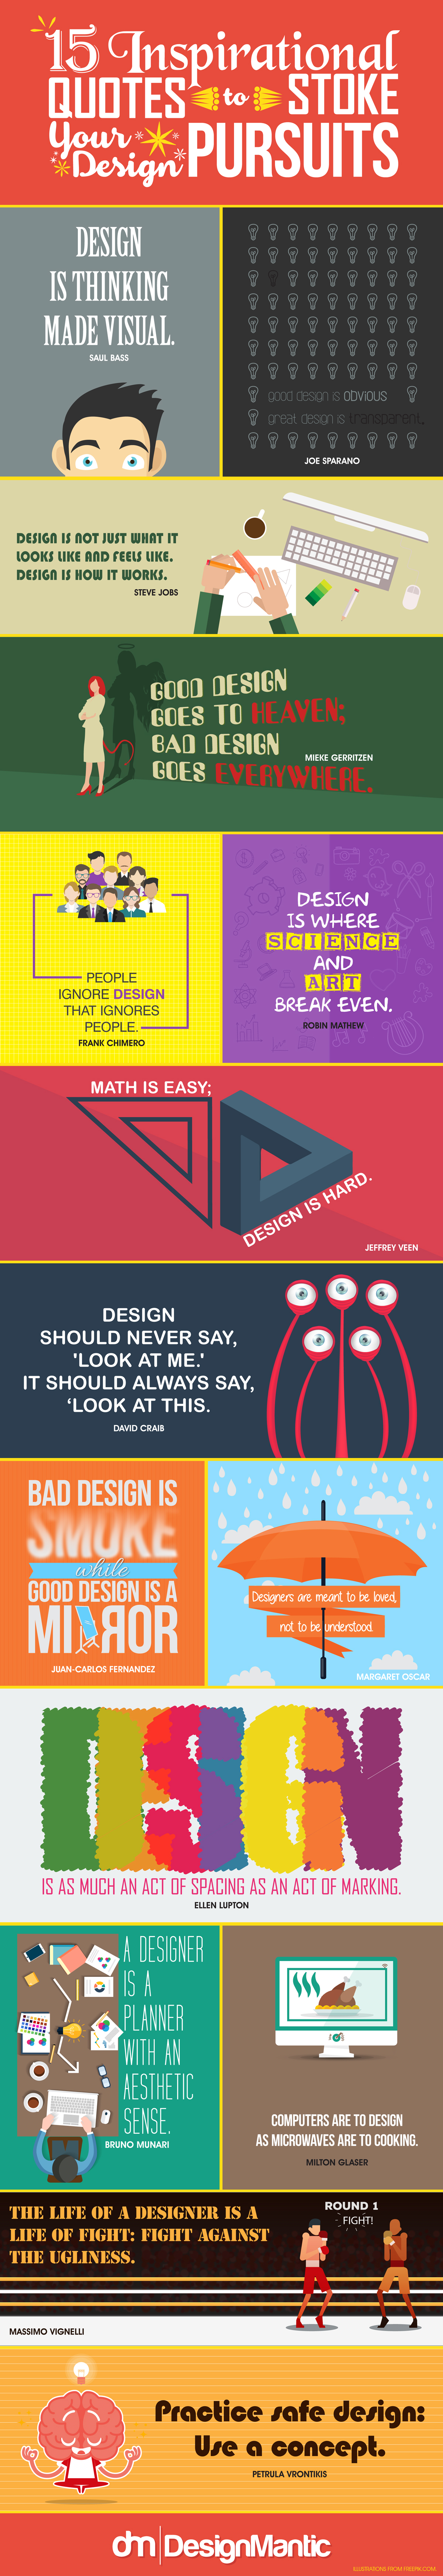 15 Inspirational Quotes To Stoke Your Design Pursuits!